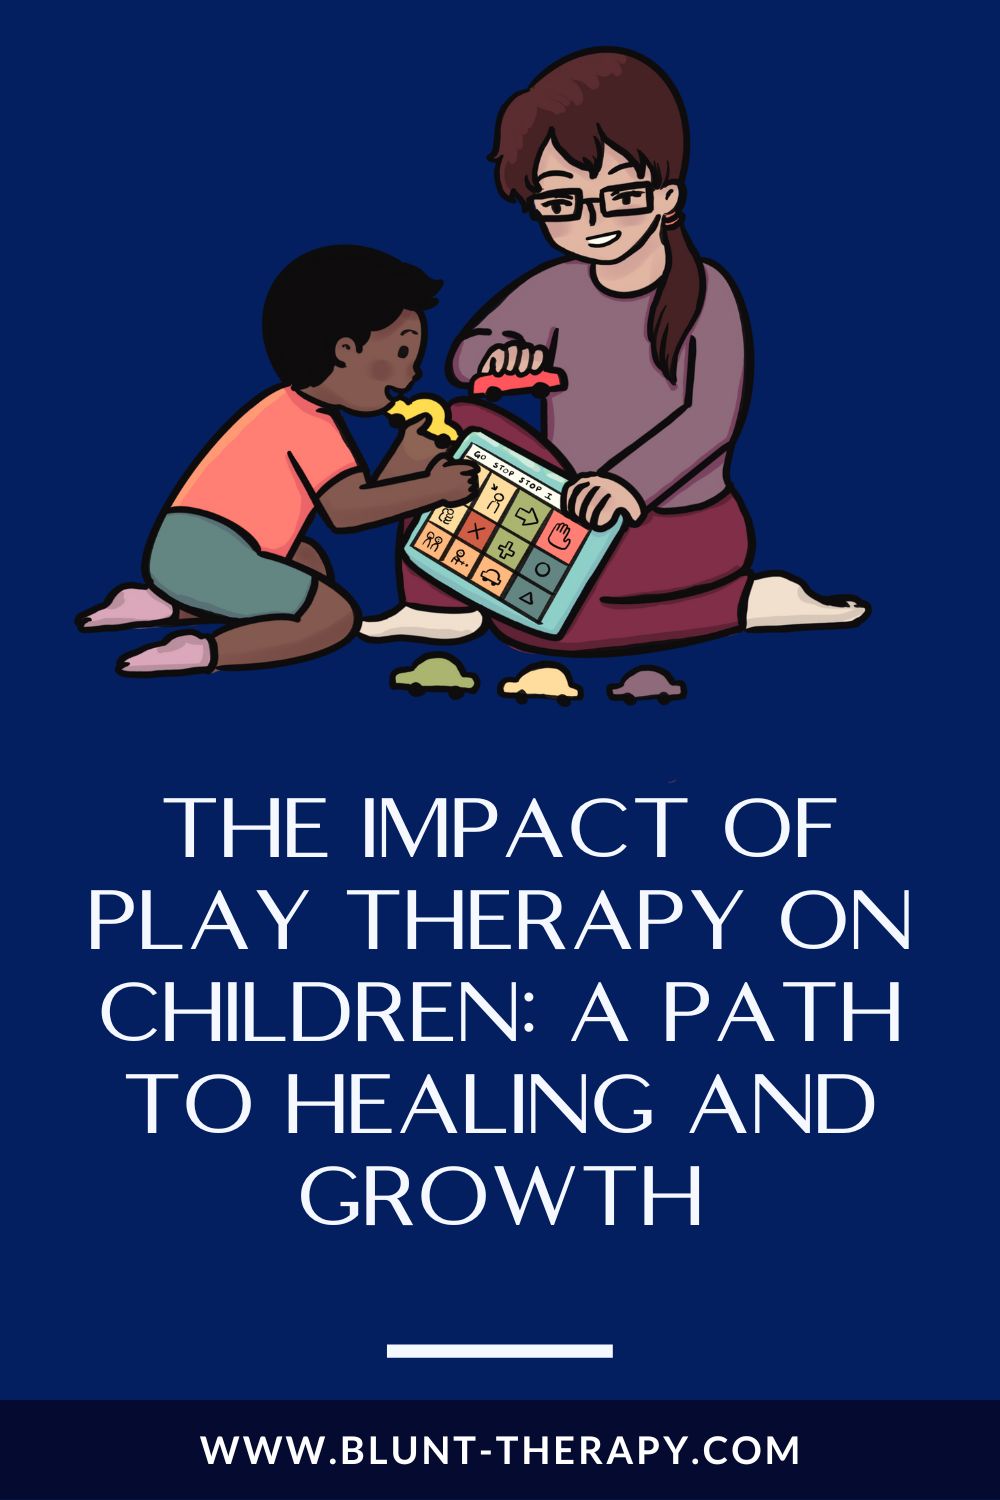 The Impact of Play Therapy on Children: A Path to Healing and Growth